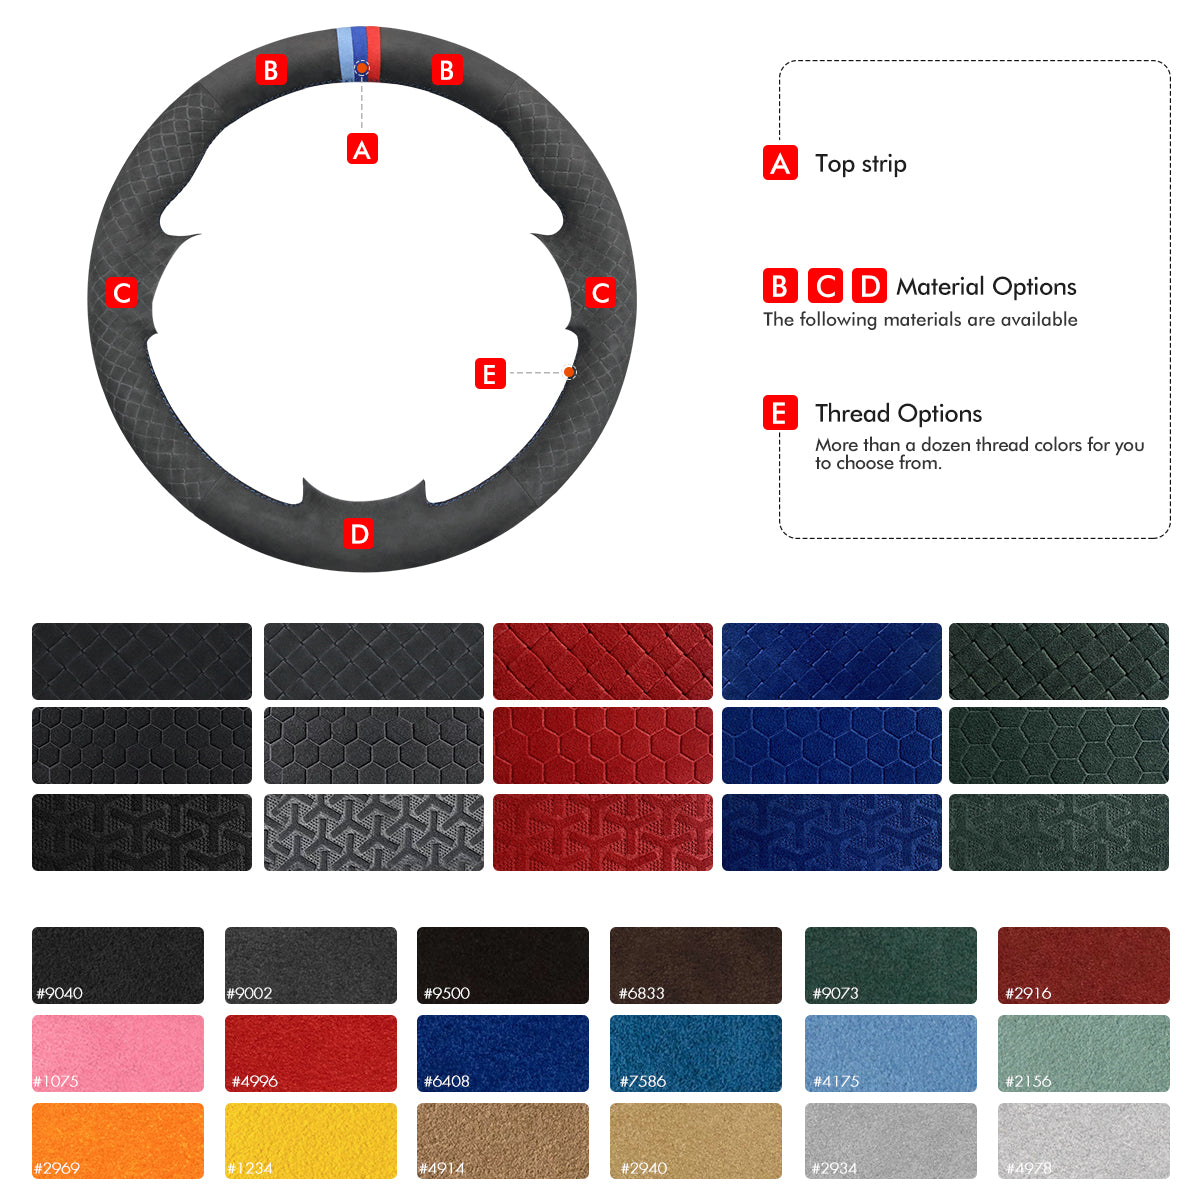 MEWANT Leather Suede Car Steering Wheel Cover for Ford Escape ST-Line/ Escape/ Ford Focus ST-Line/ Focus ST/ Kuga ST-Line/ Puma ST-Line/ Puma ST/ Fiesta ST-Line/ Fiesta ST